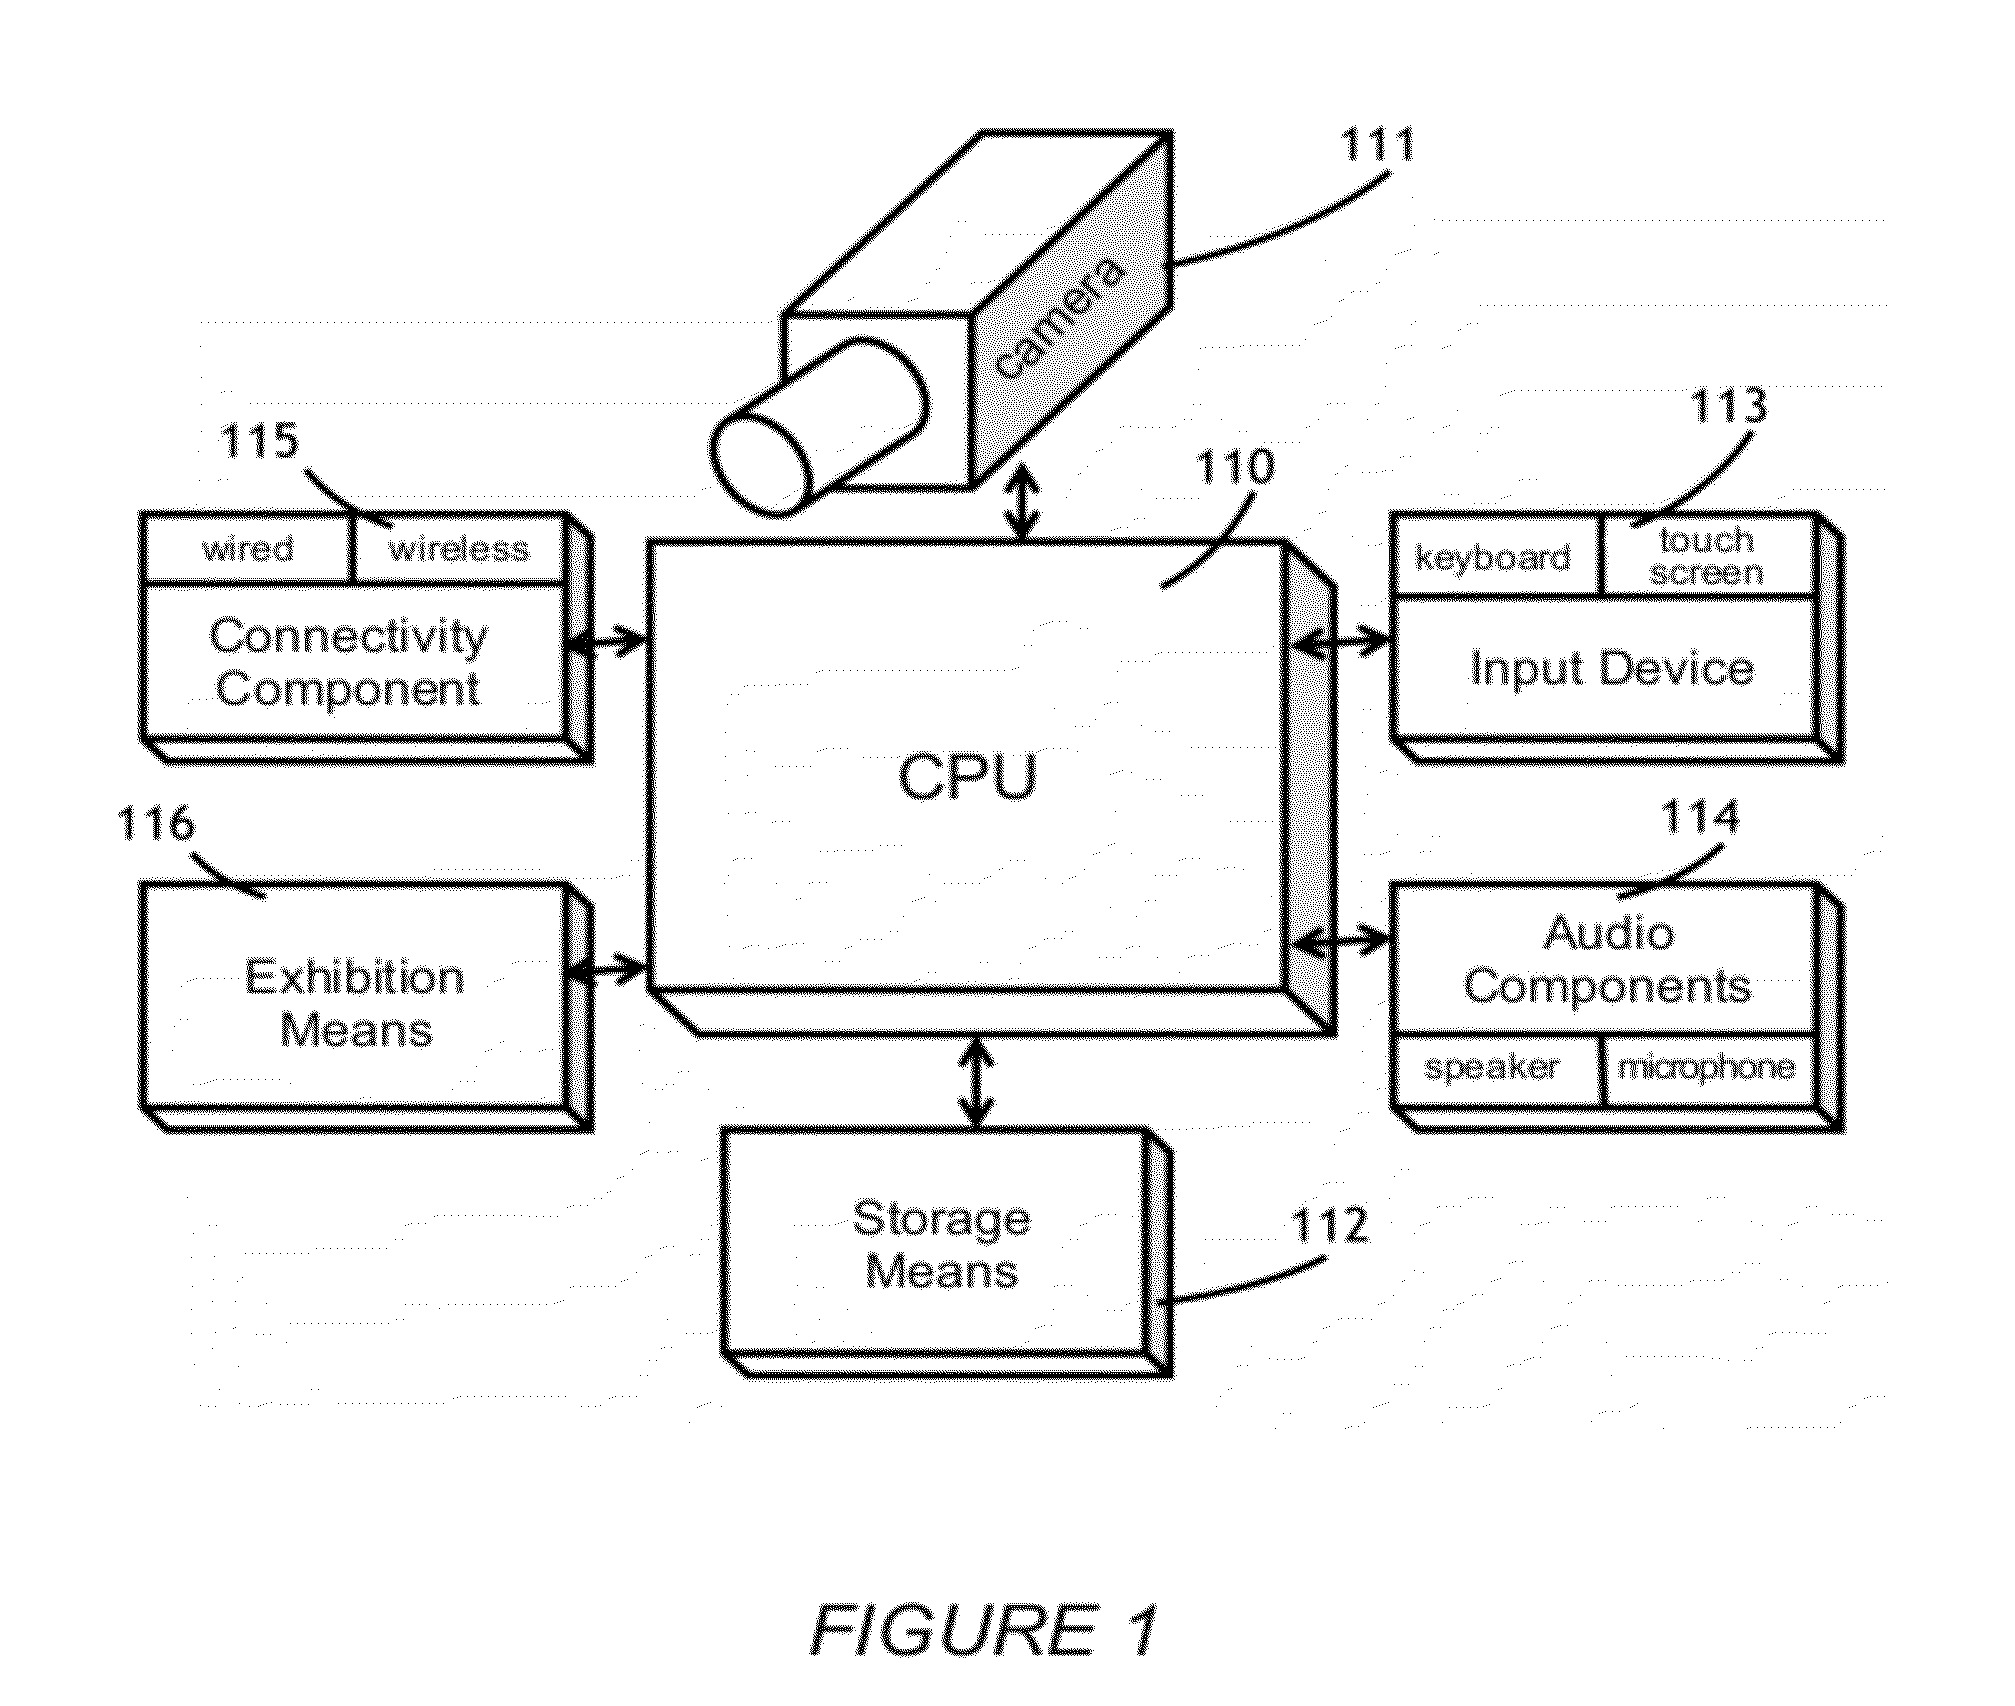 System for Food Recognition Method Using Portable Devices Having Digital Cameras